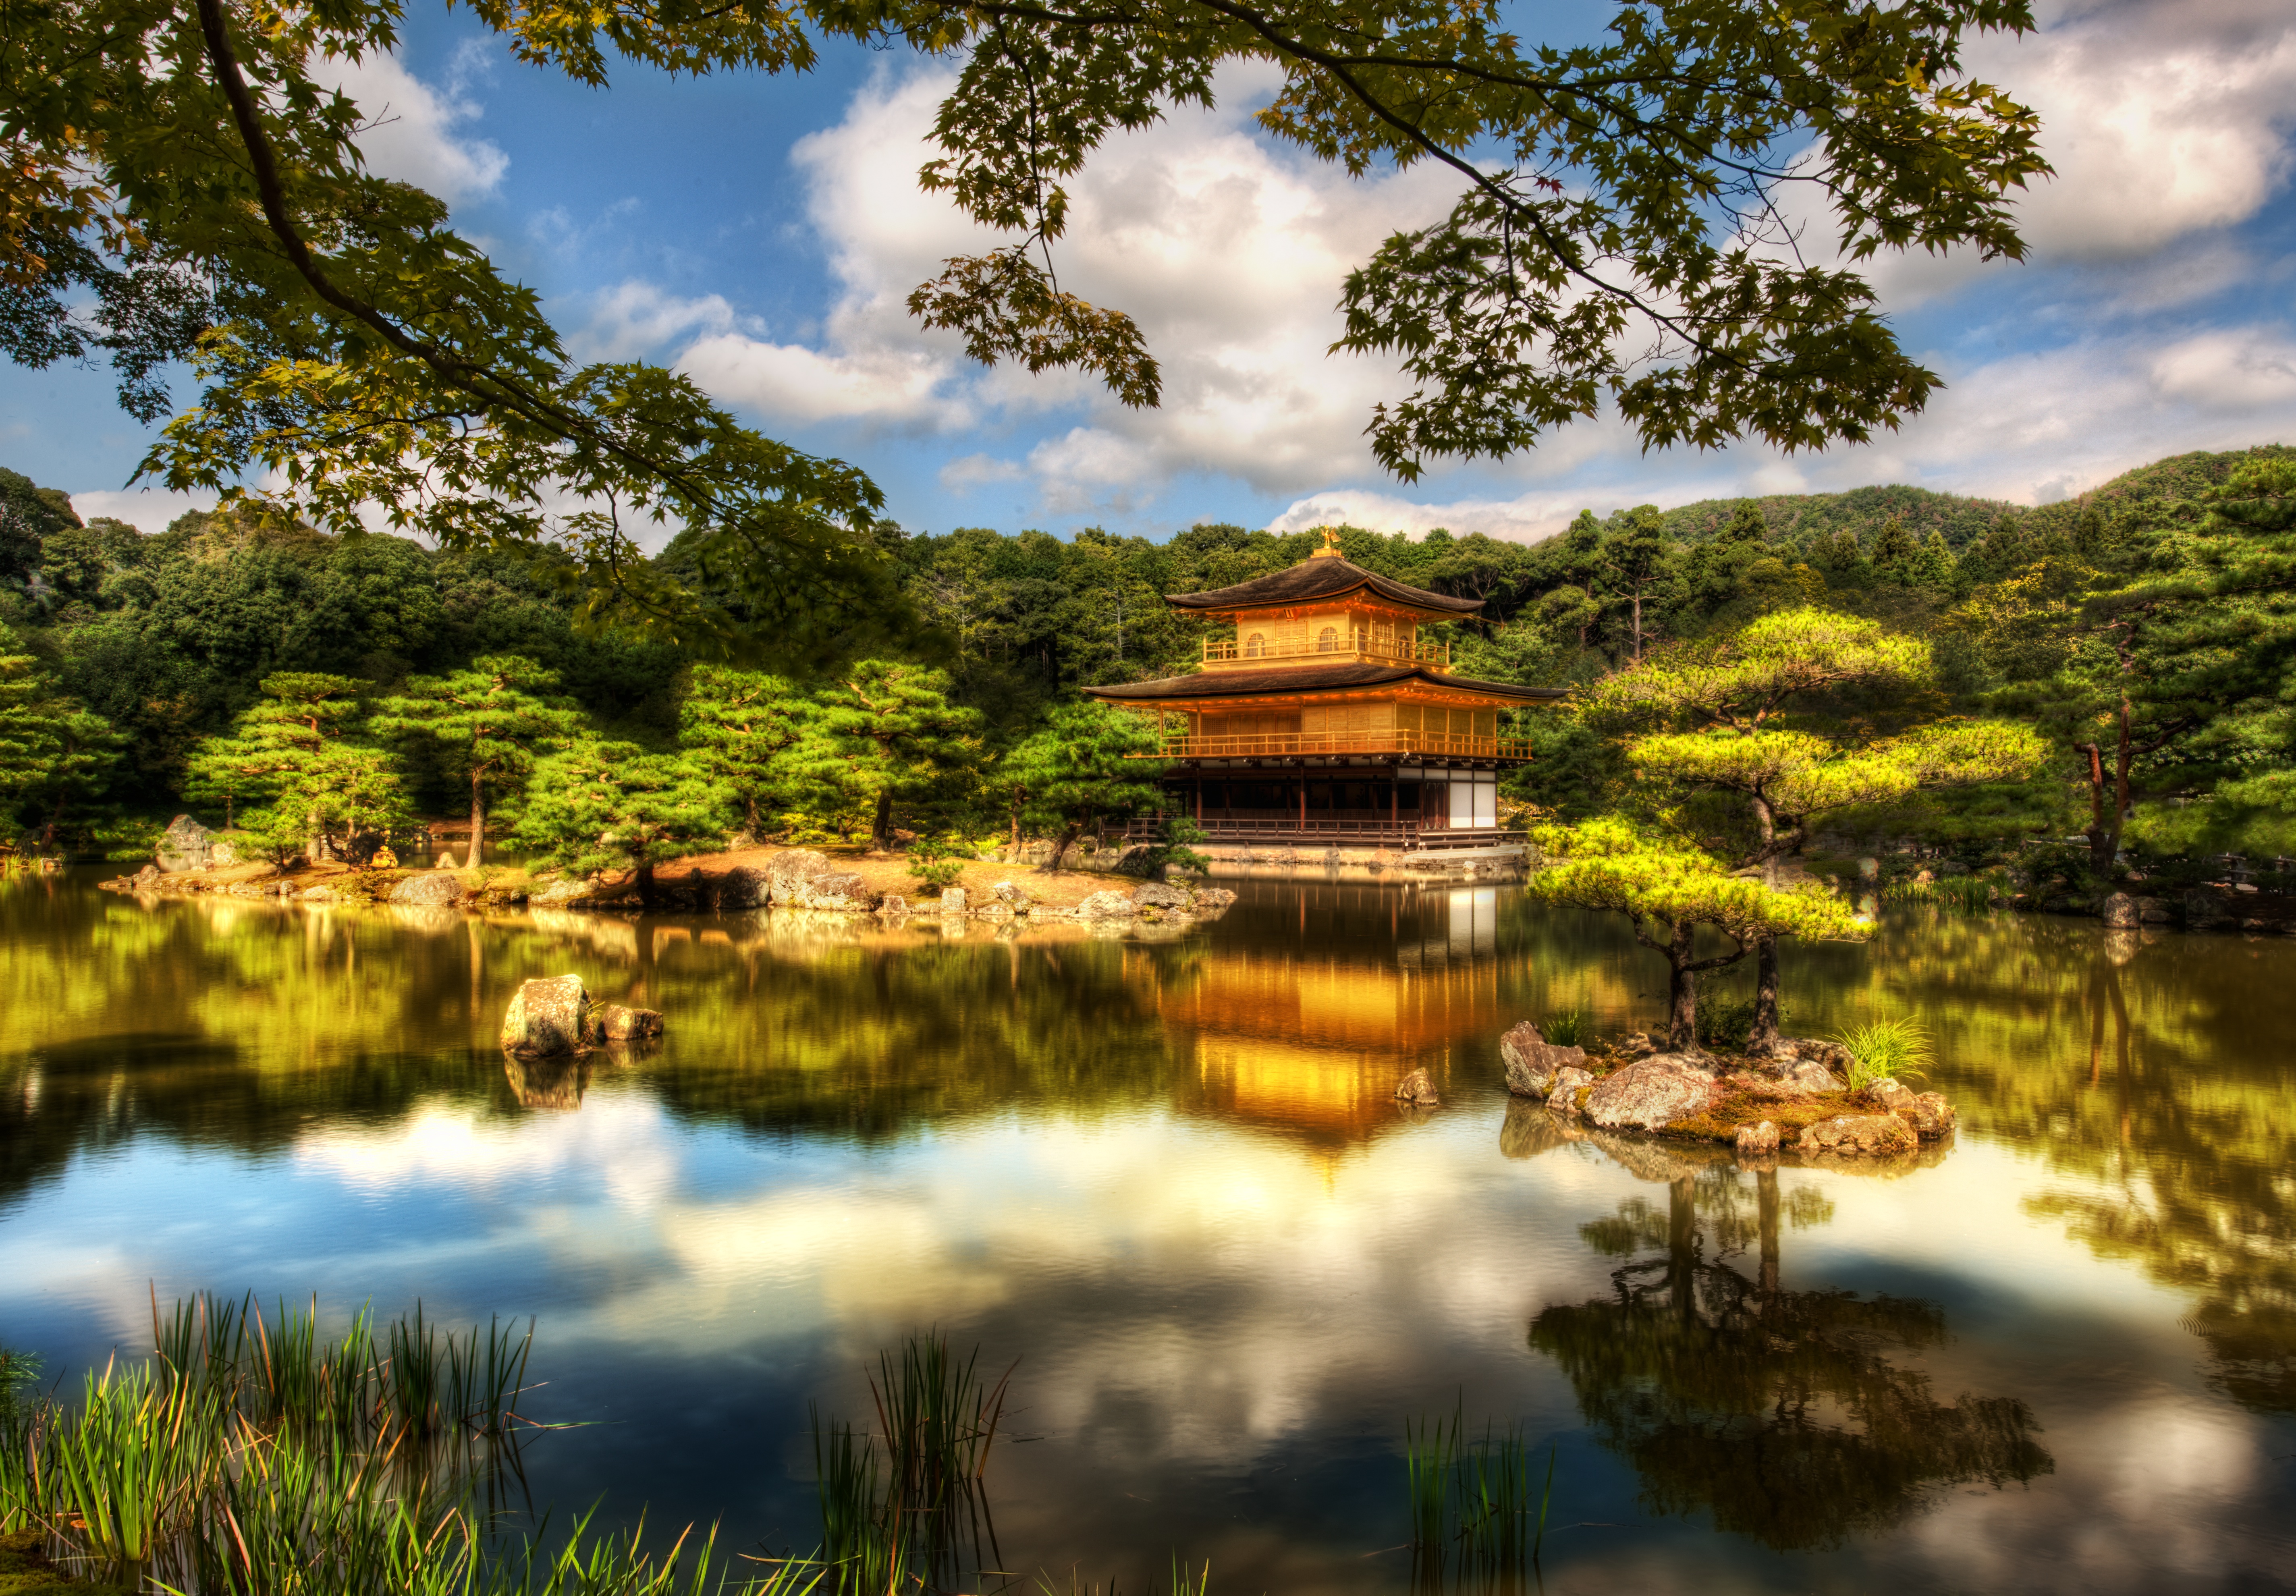 Golden Pavilion at Kinkaku-ji Temple in Kyoto, Japan, with stunning detail and vibrant colors